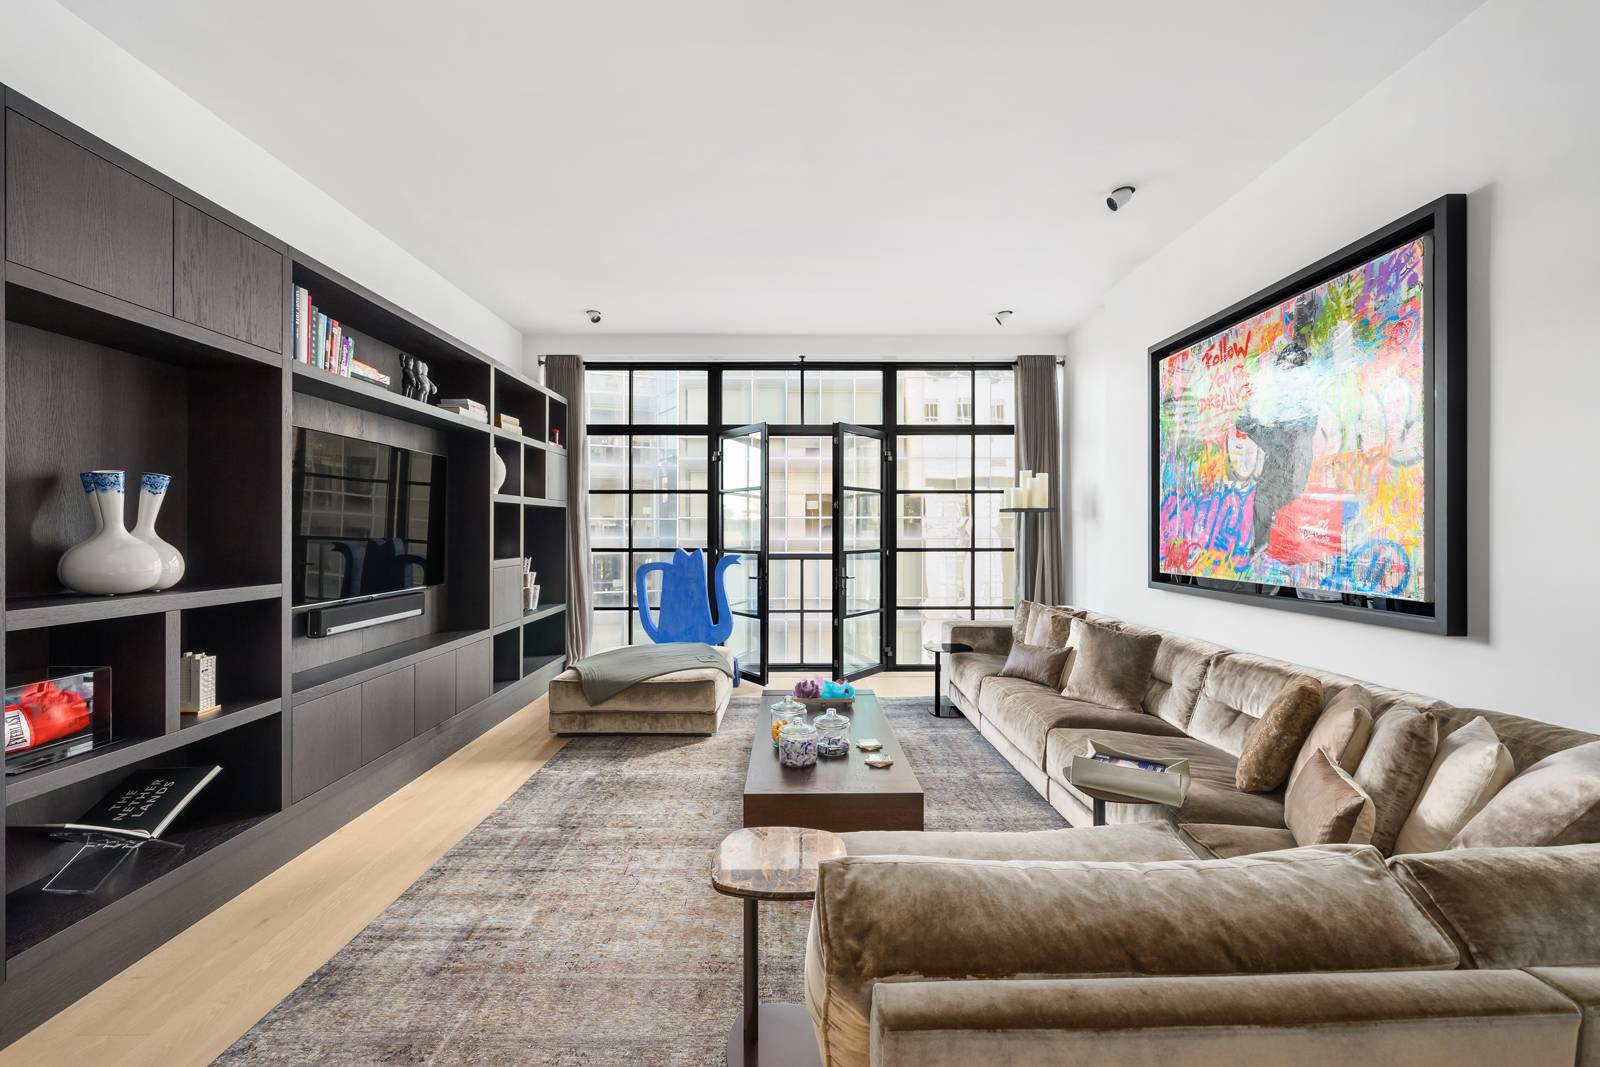 Designed by world renowned designer Piet Boon, this quiet three bedroom, two and a half bath, residence in the heart of NoMad offers dramatic 11' 5A A A ceilings, and ...